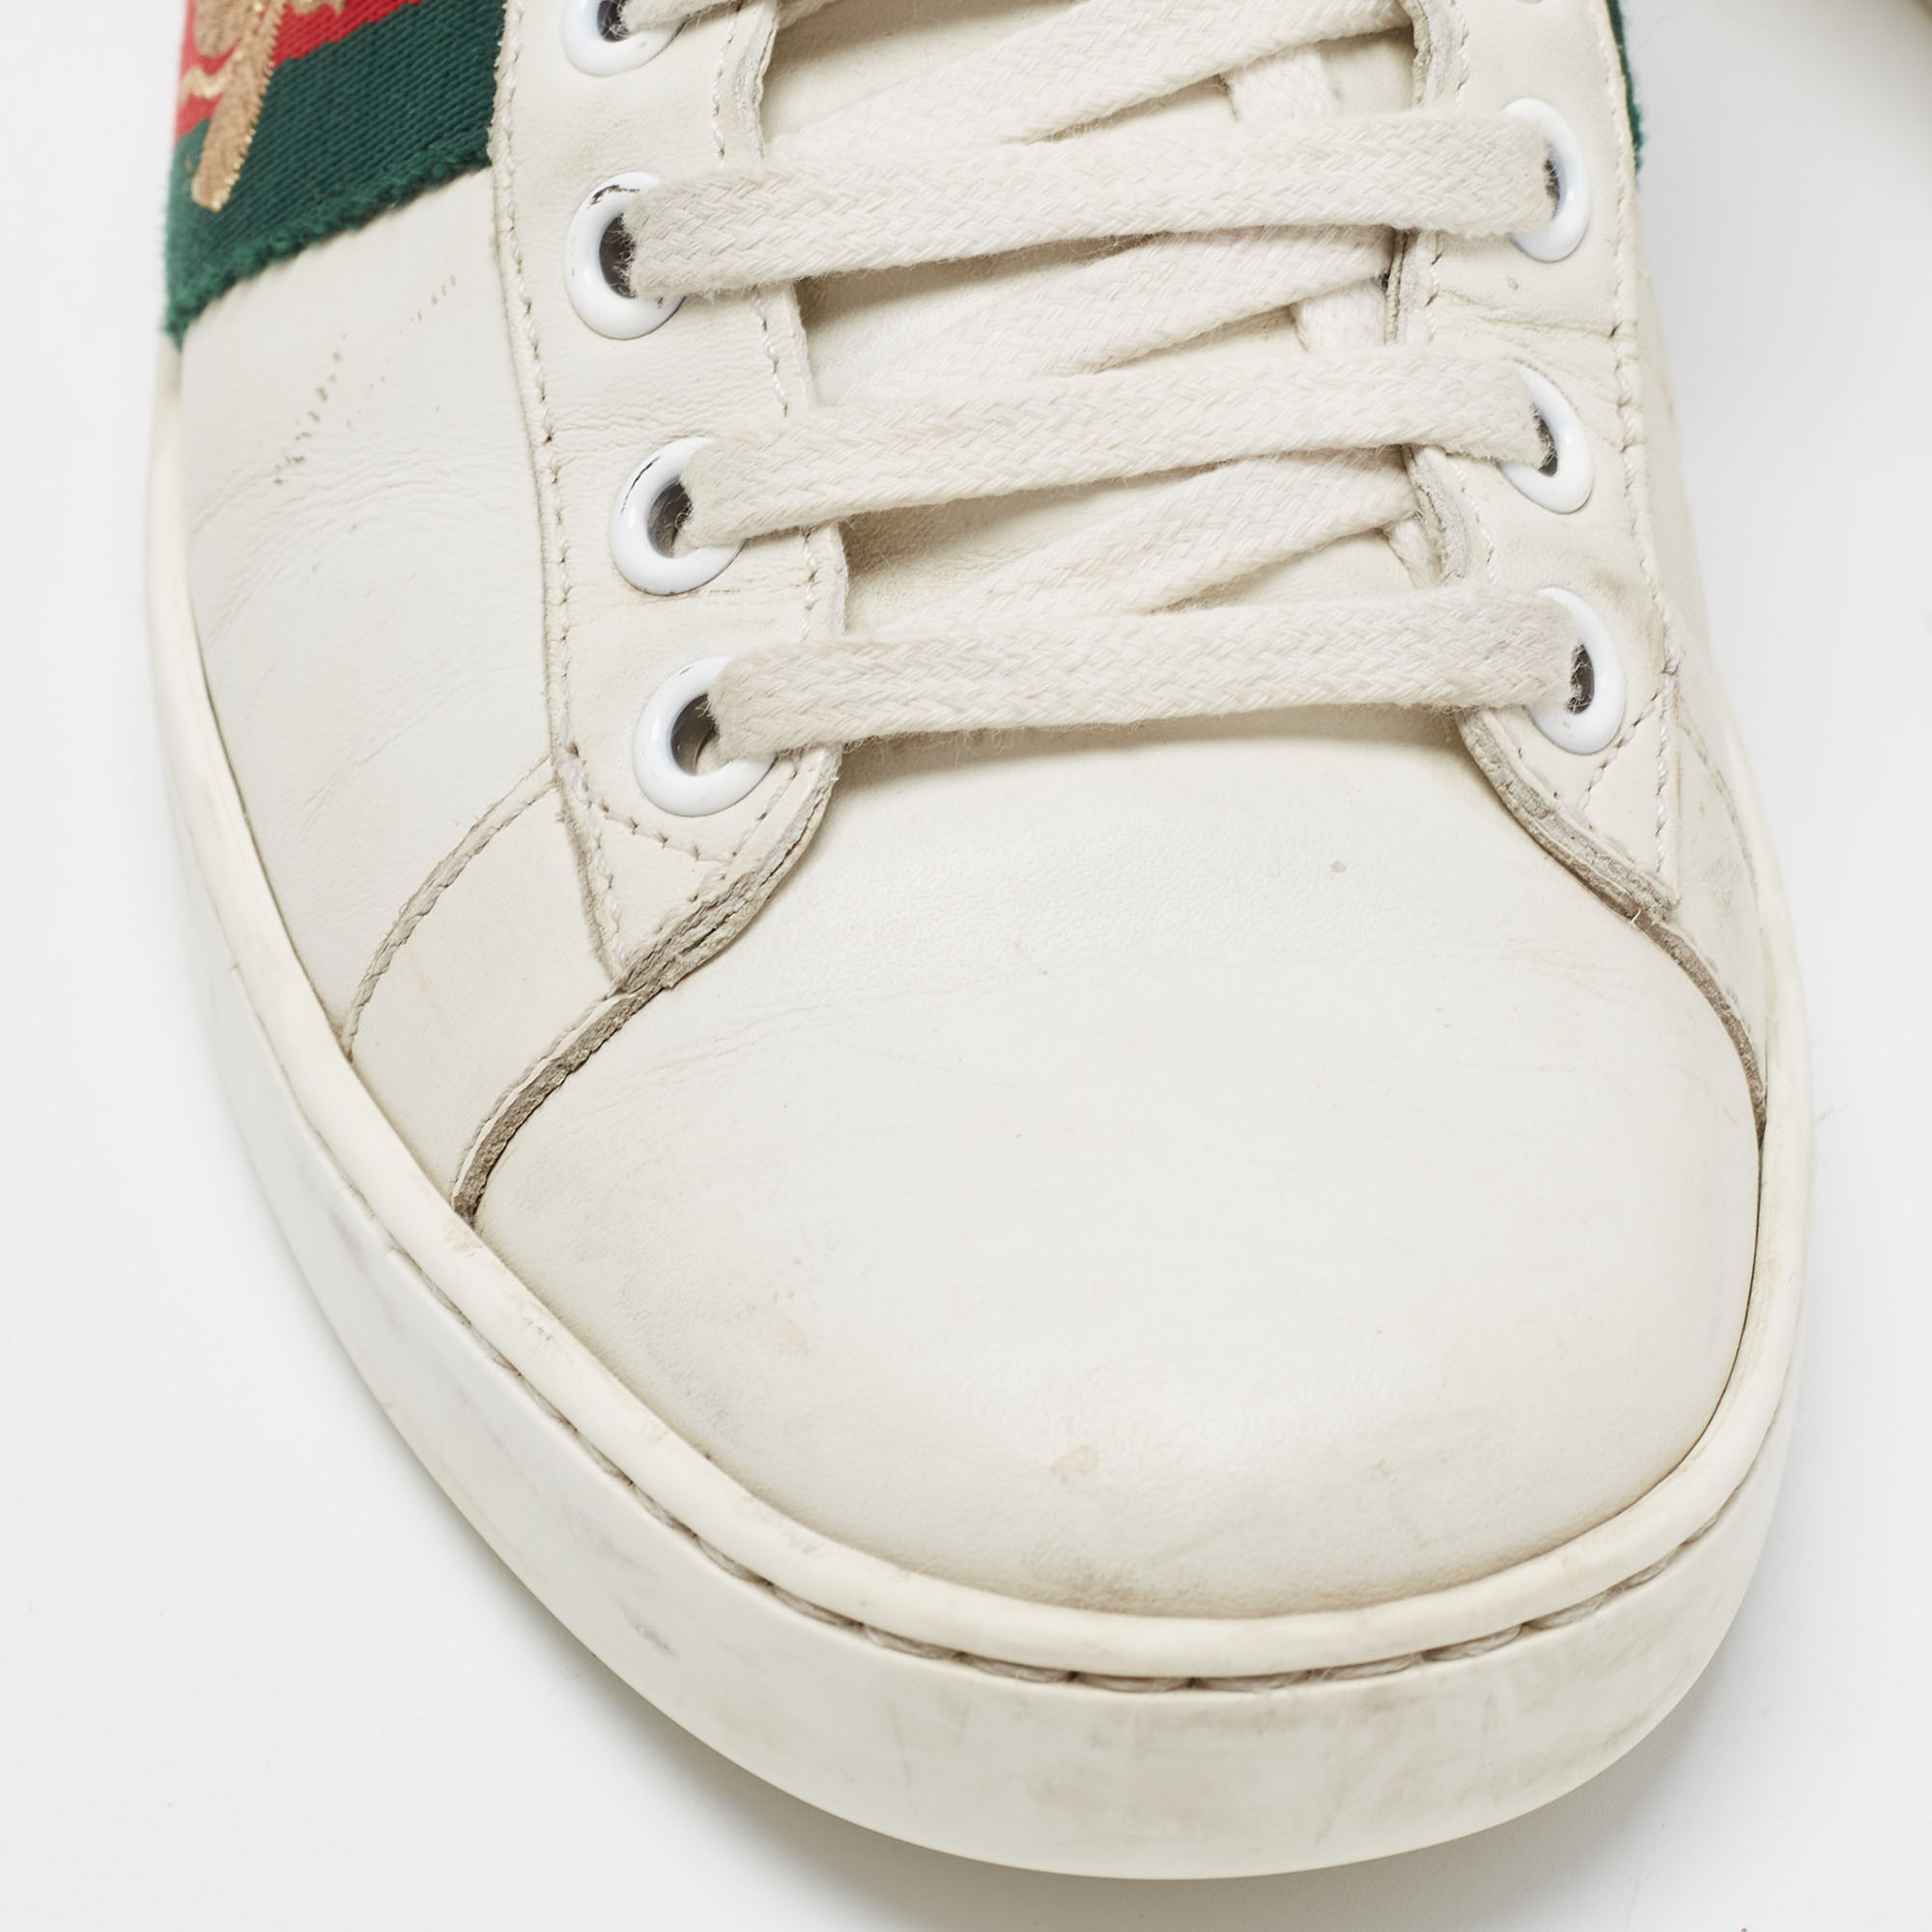 Gucci White Leather Embroidered Bee Ace Sneakers Size 36.5